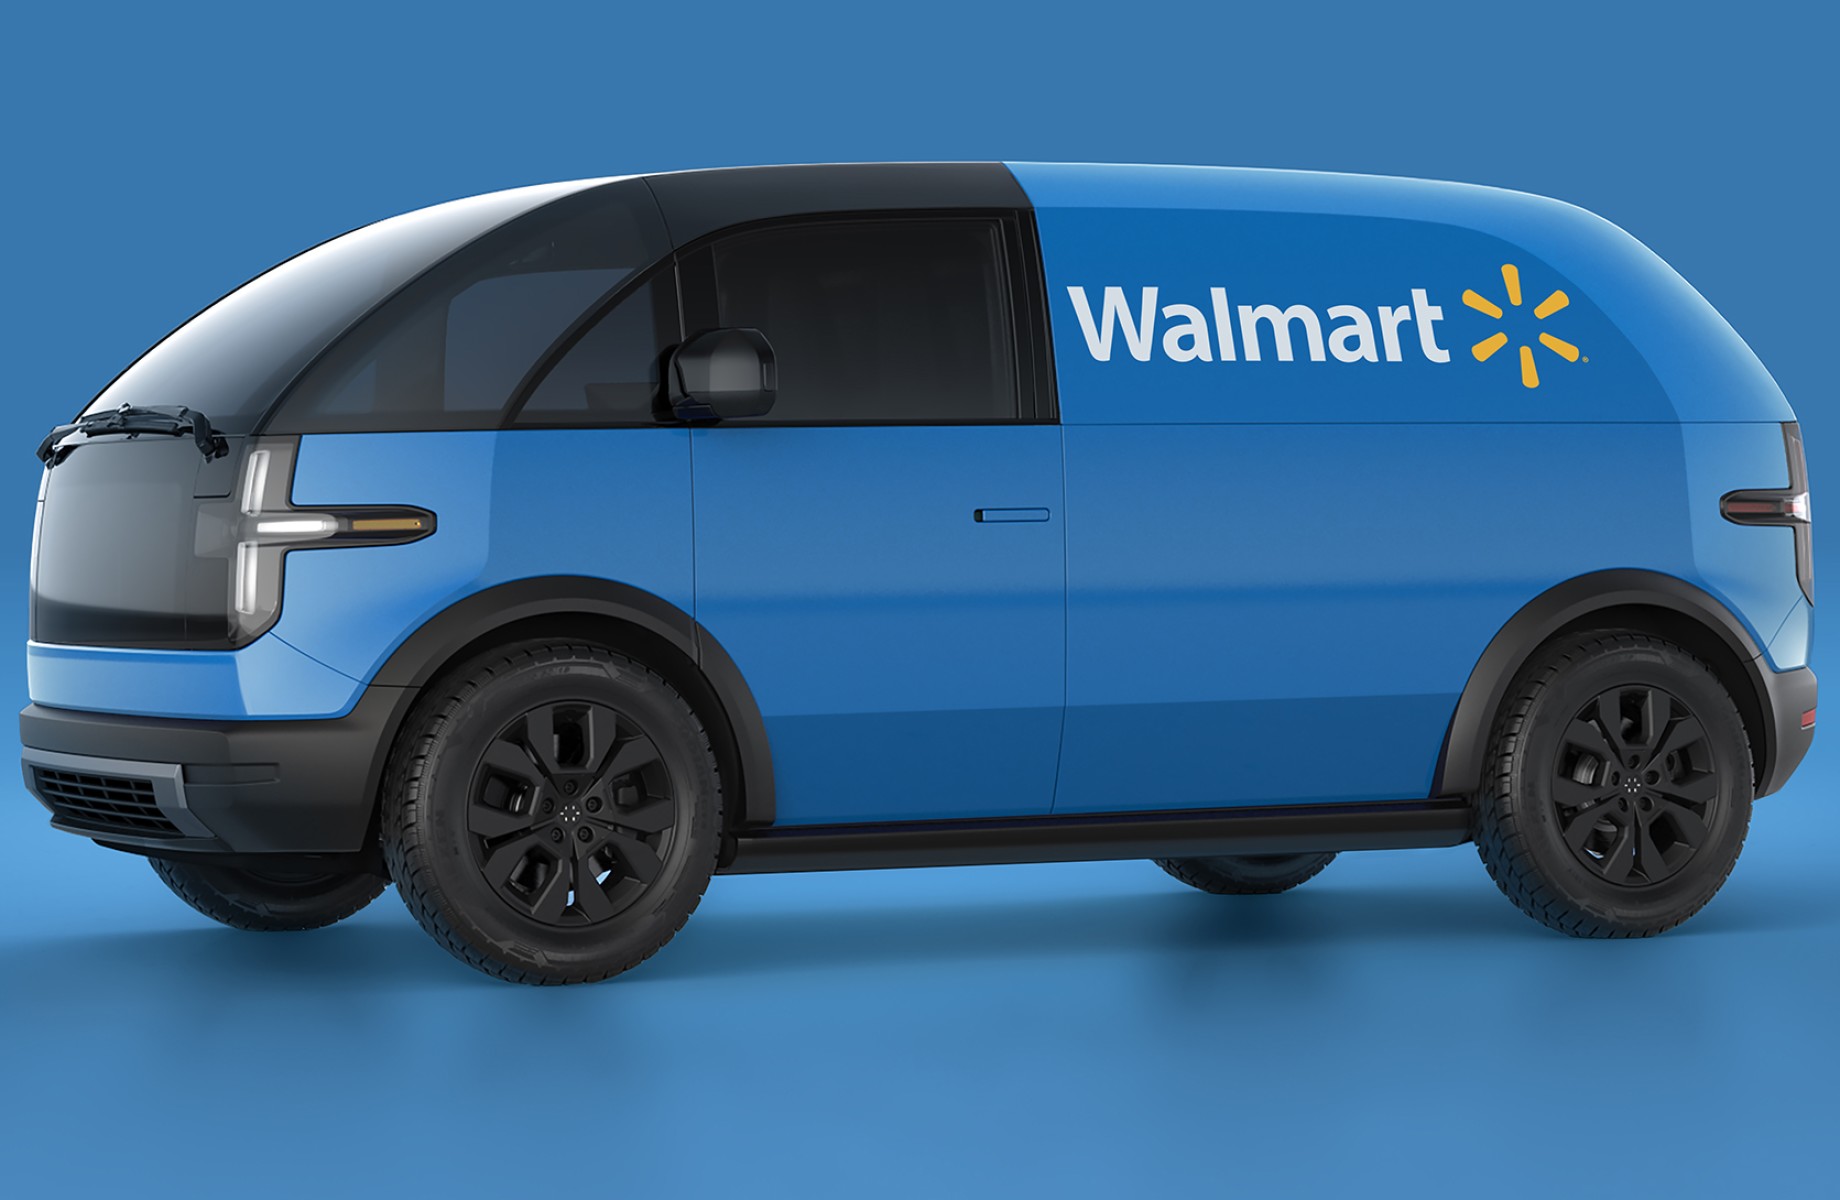 Walmart to Purchase 4,500 Canoo Electric Delivery Vehicles to Support E-Commerce Business